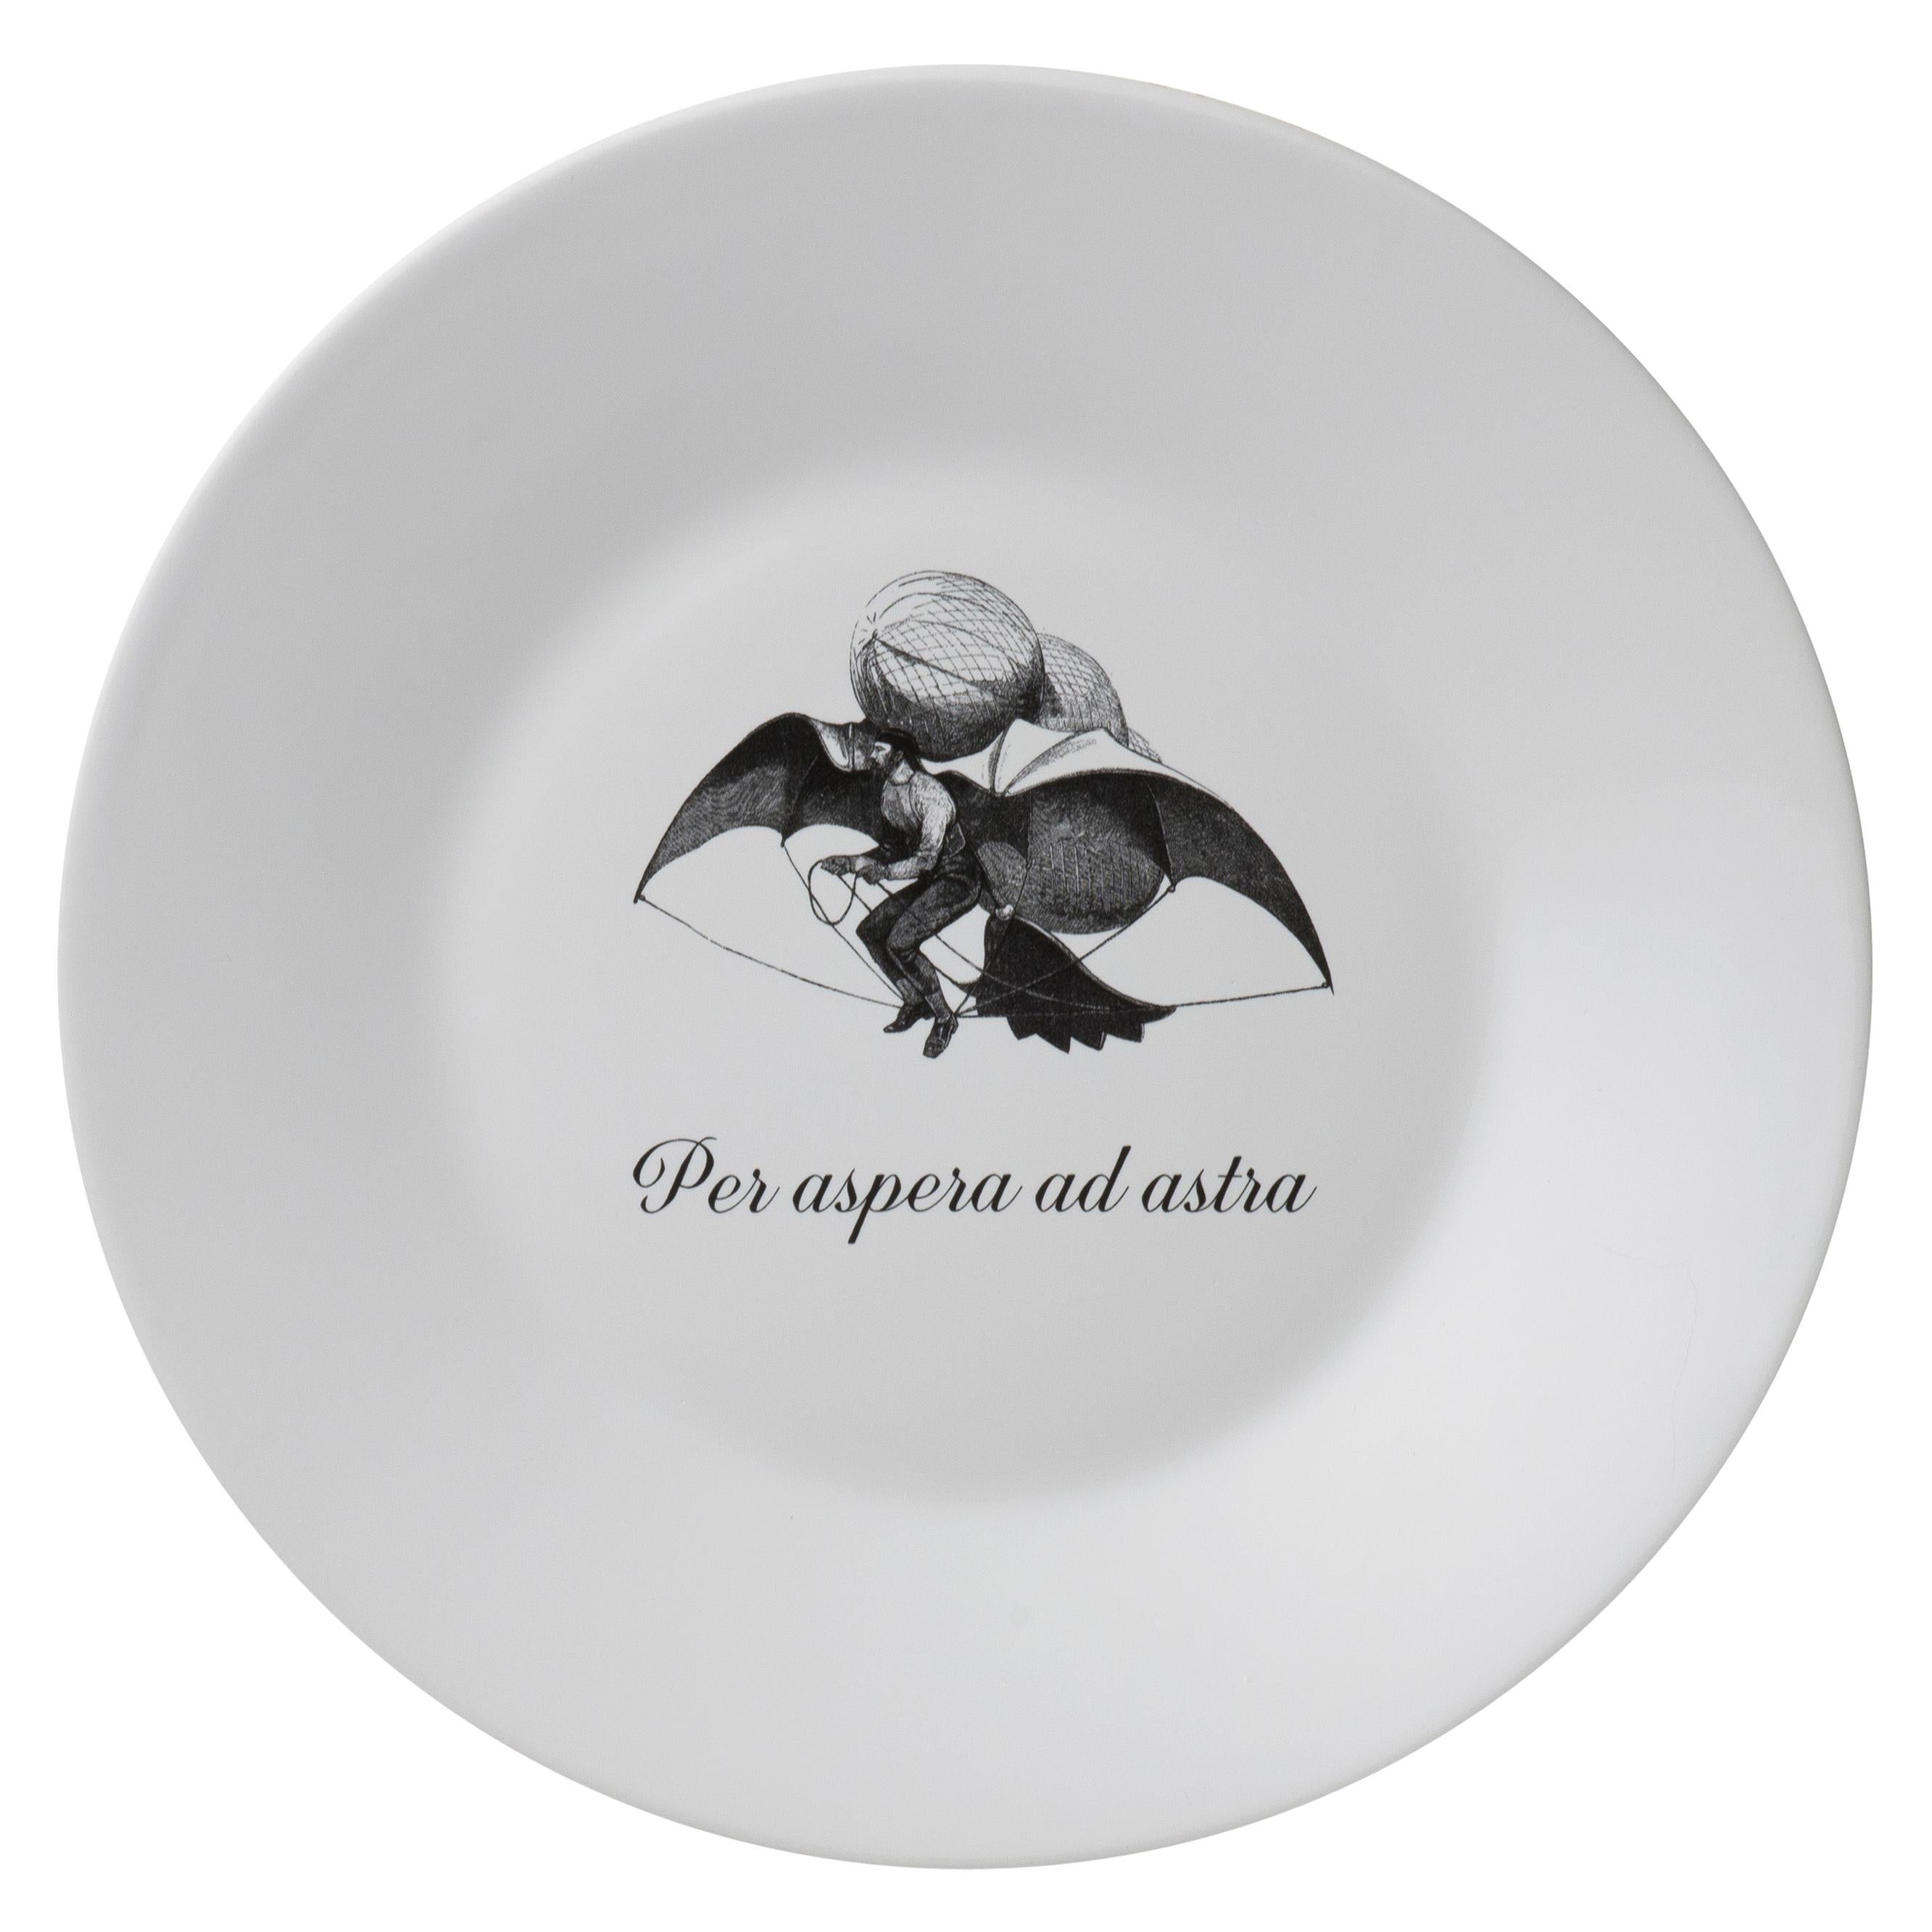 "Ipse dixit", Crafted in Italy Set of Dessert Plates with Famous Latin Mottos For Sale